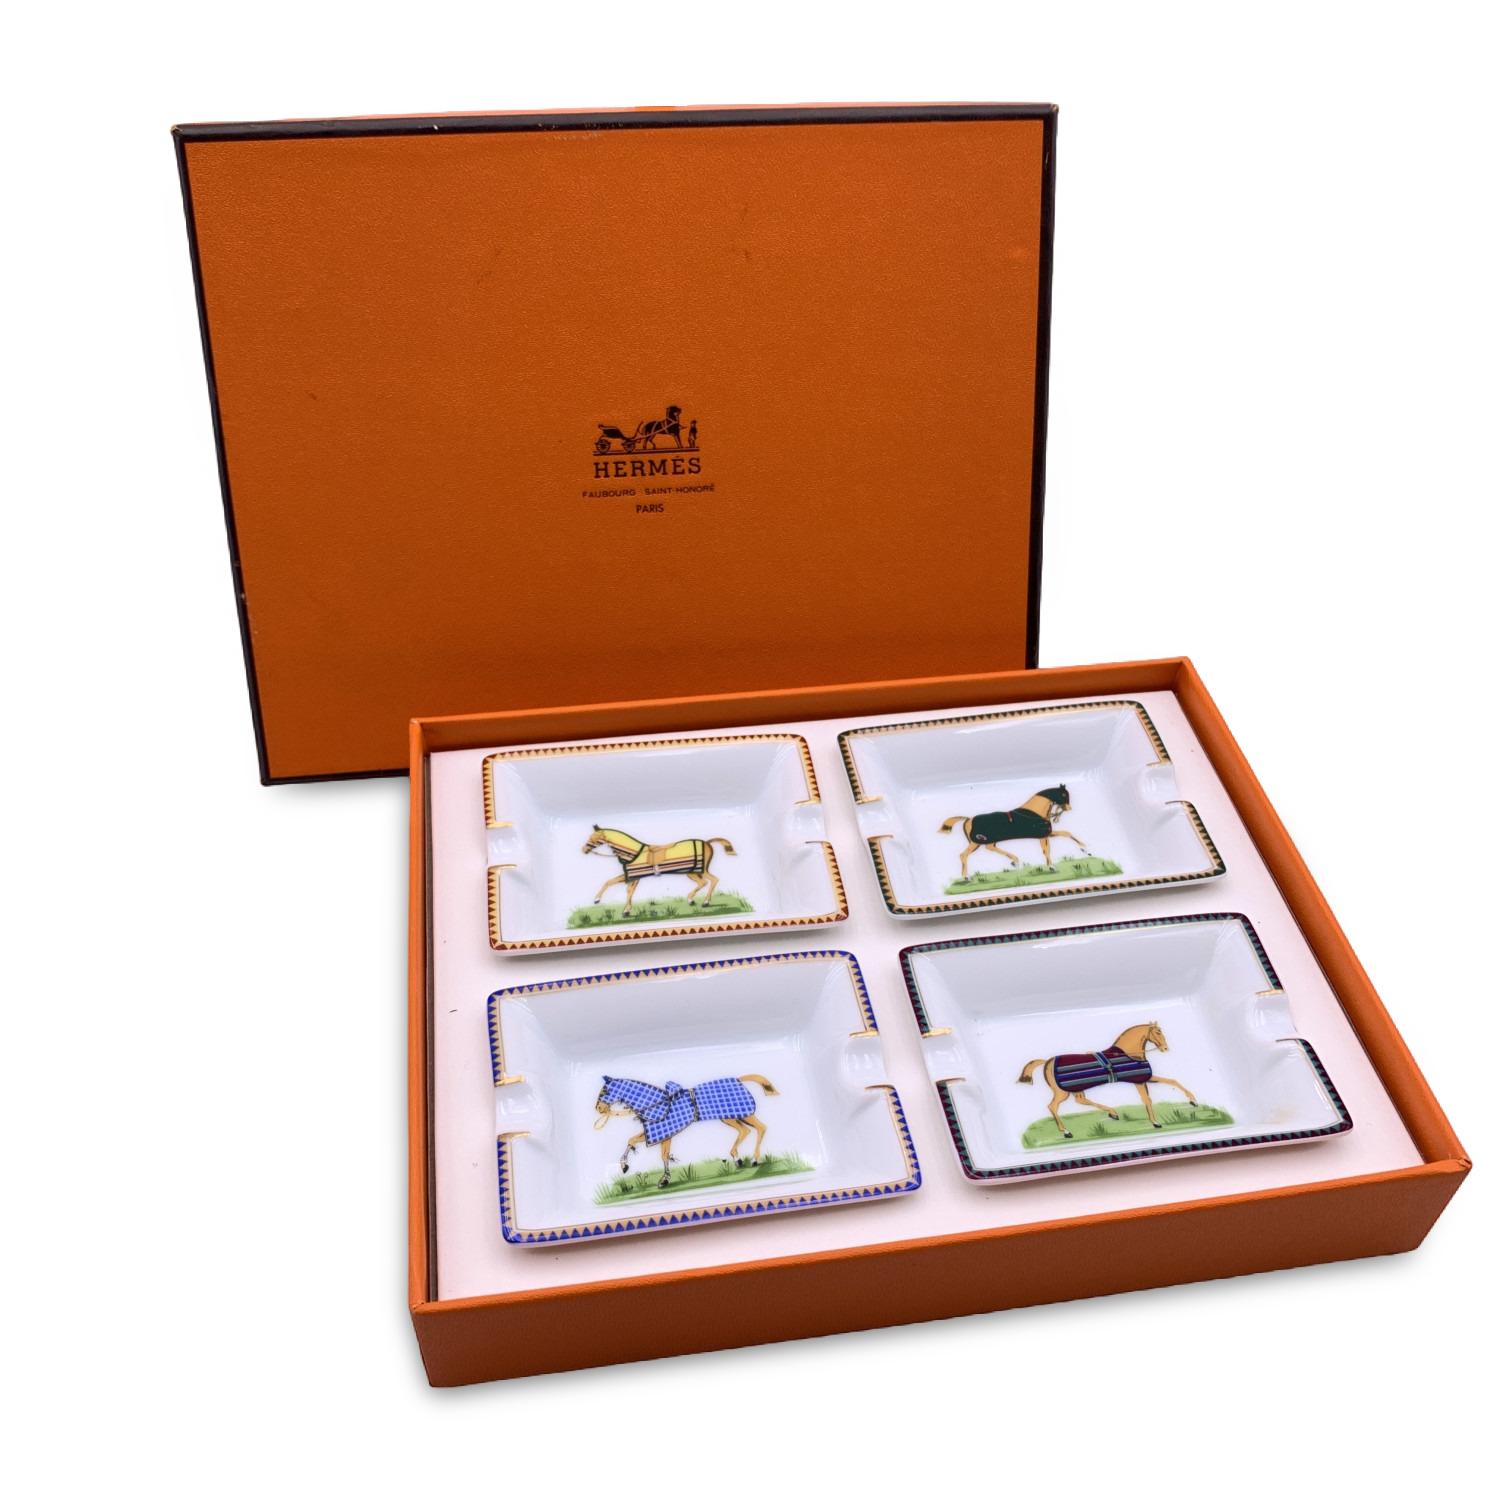 Hermes Vintage set of 4 mini ashtrays Rectangular shape. White porcelain decorated with a print of galloping horses in the centre of them. Each ashtray is marked with 'Hermes Paris' and 'Made in France' writings. Original Hermes orange box included.